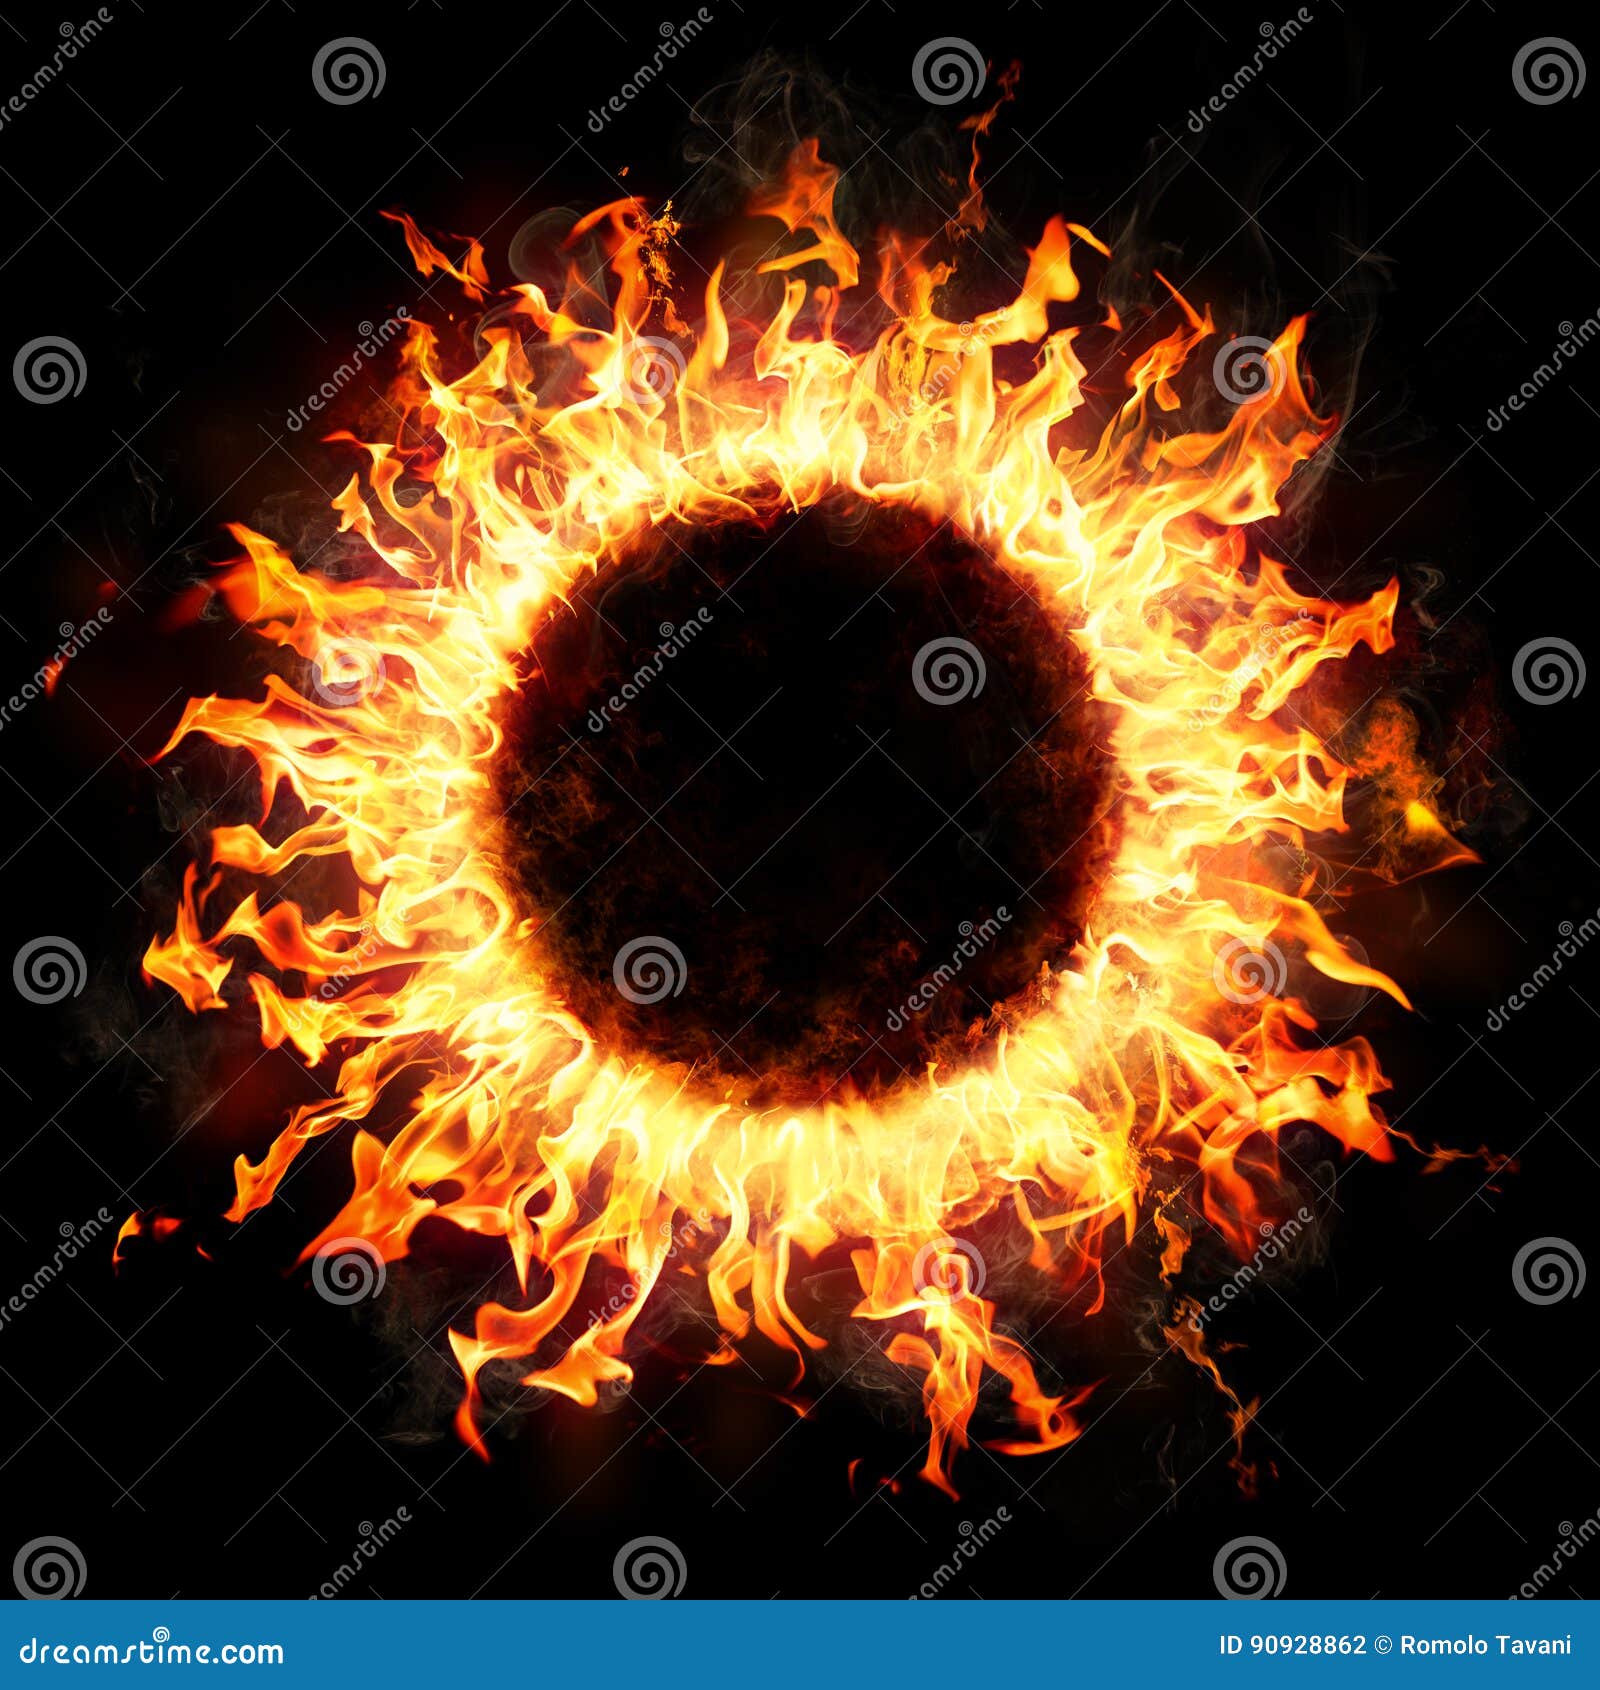 fire ring in the dark